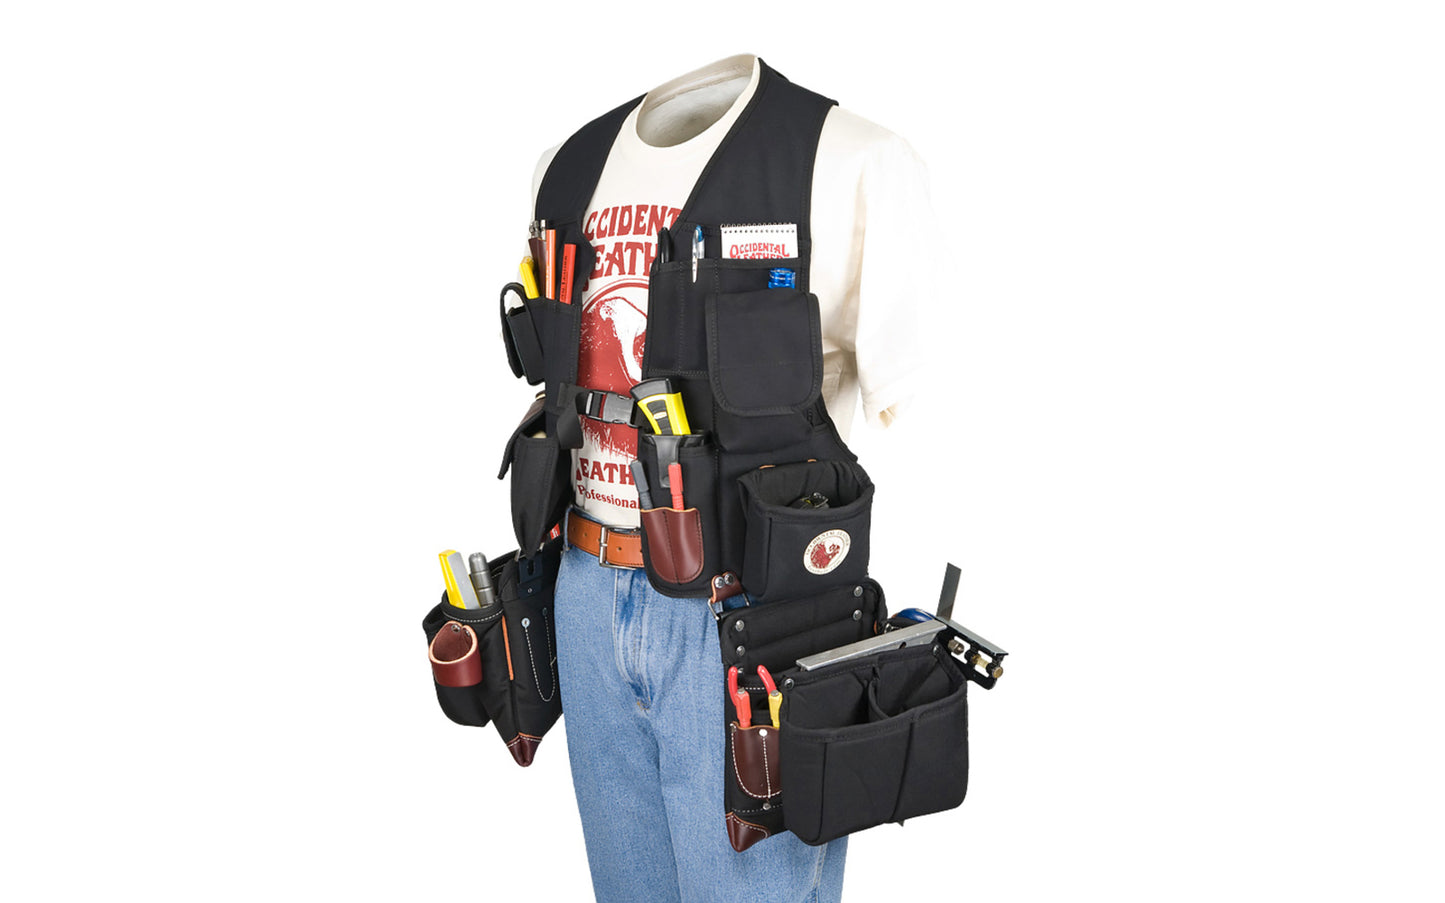 Occidental Leather "Builders' Vest" Framer Package system is a compact tool vest carrying system, loaded with holders & pockets. A belt-free system combined with clip-on framing bags. 36 total pockets & tool holders. Special tool vest system No. 2585. Made of industrial nylon material & genuine leather. 759244275605